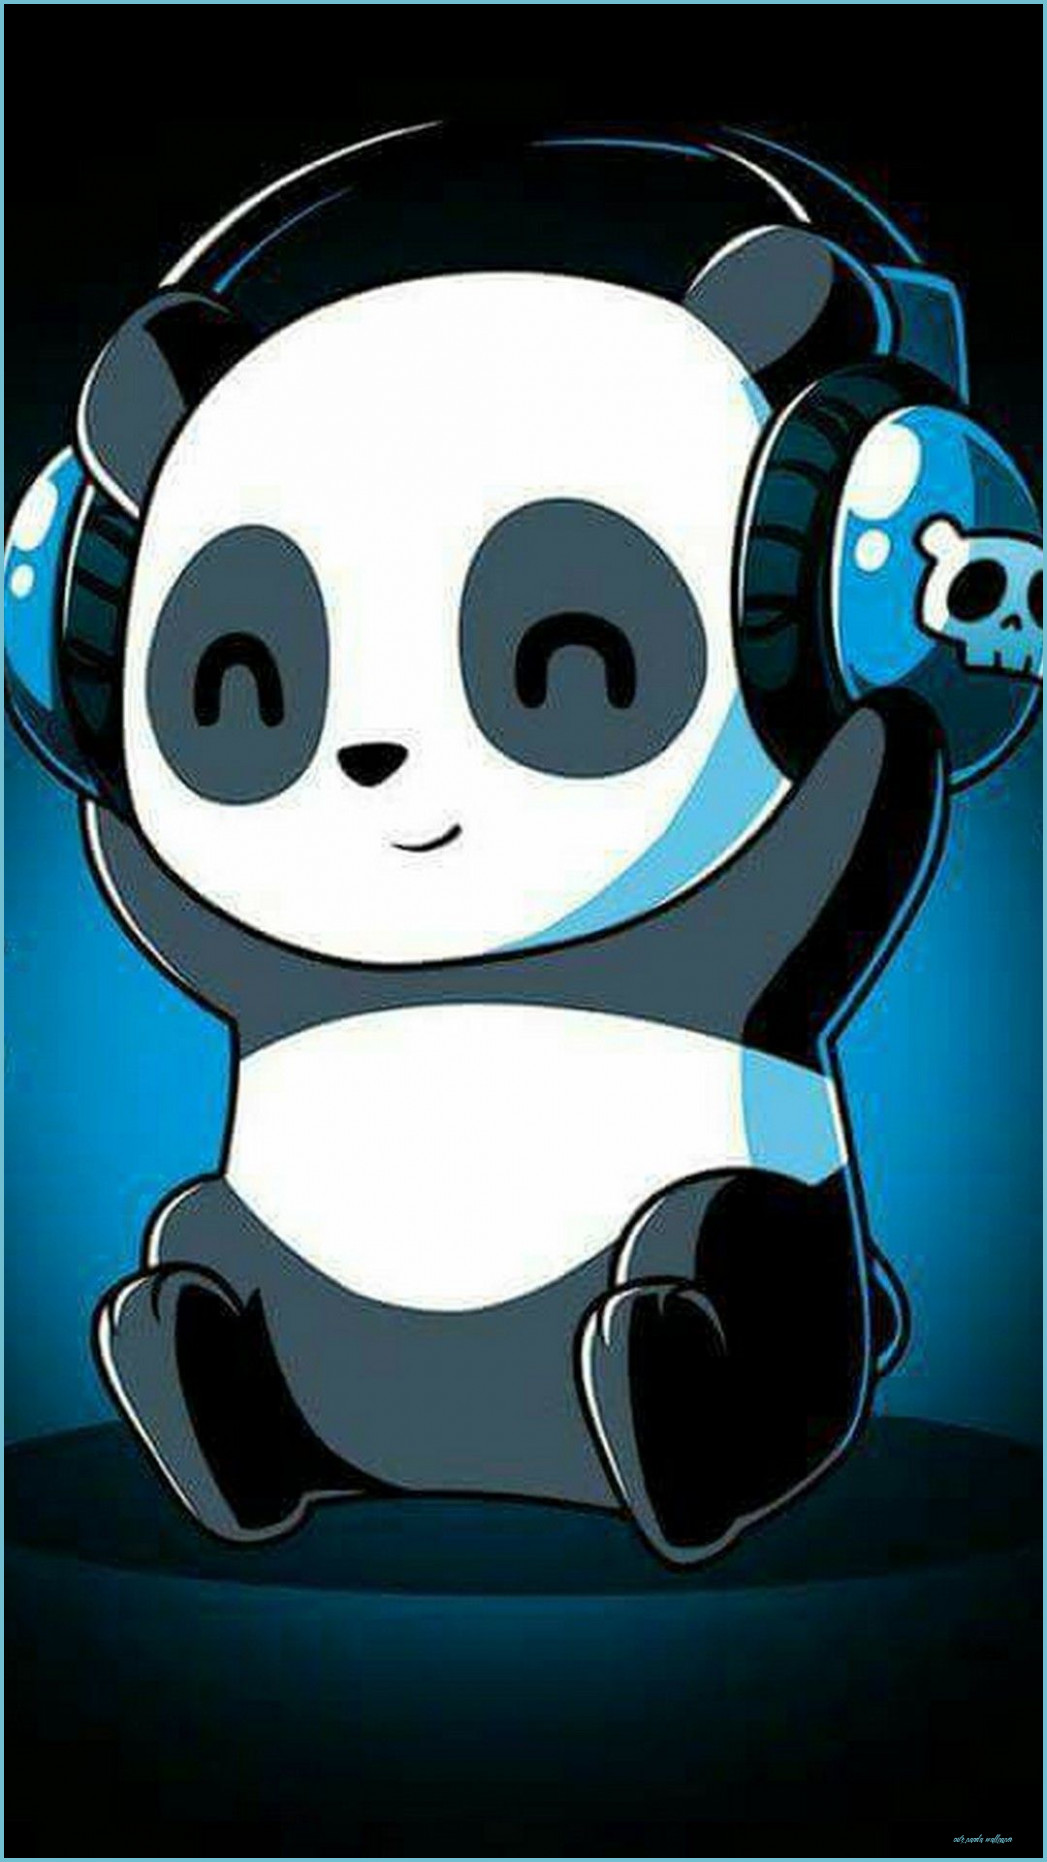 Cute Panda Galaxy iPhoneAndroid Wallpaper I Created For The App Top Chart   Cute wallpapers Download cute wallpapers Galaxy wallpaper